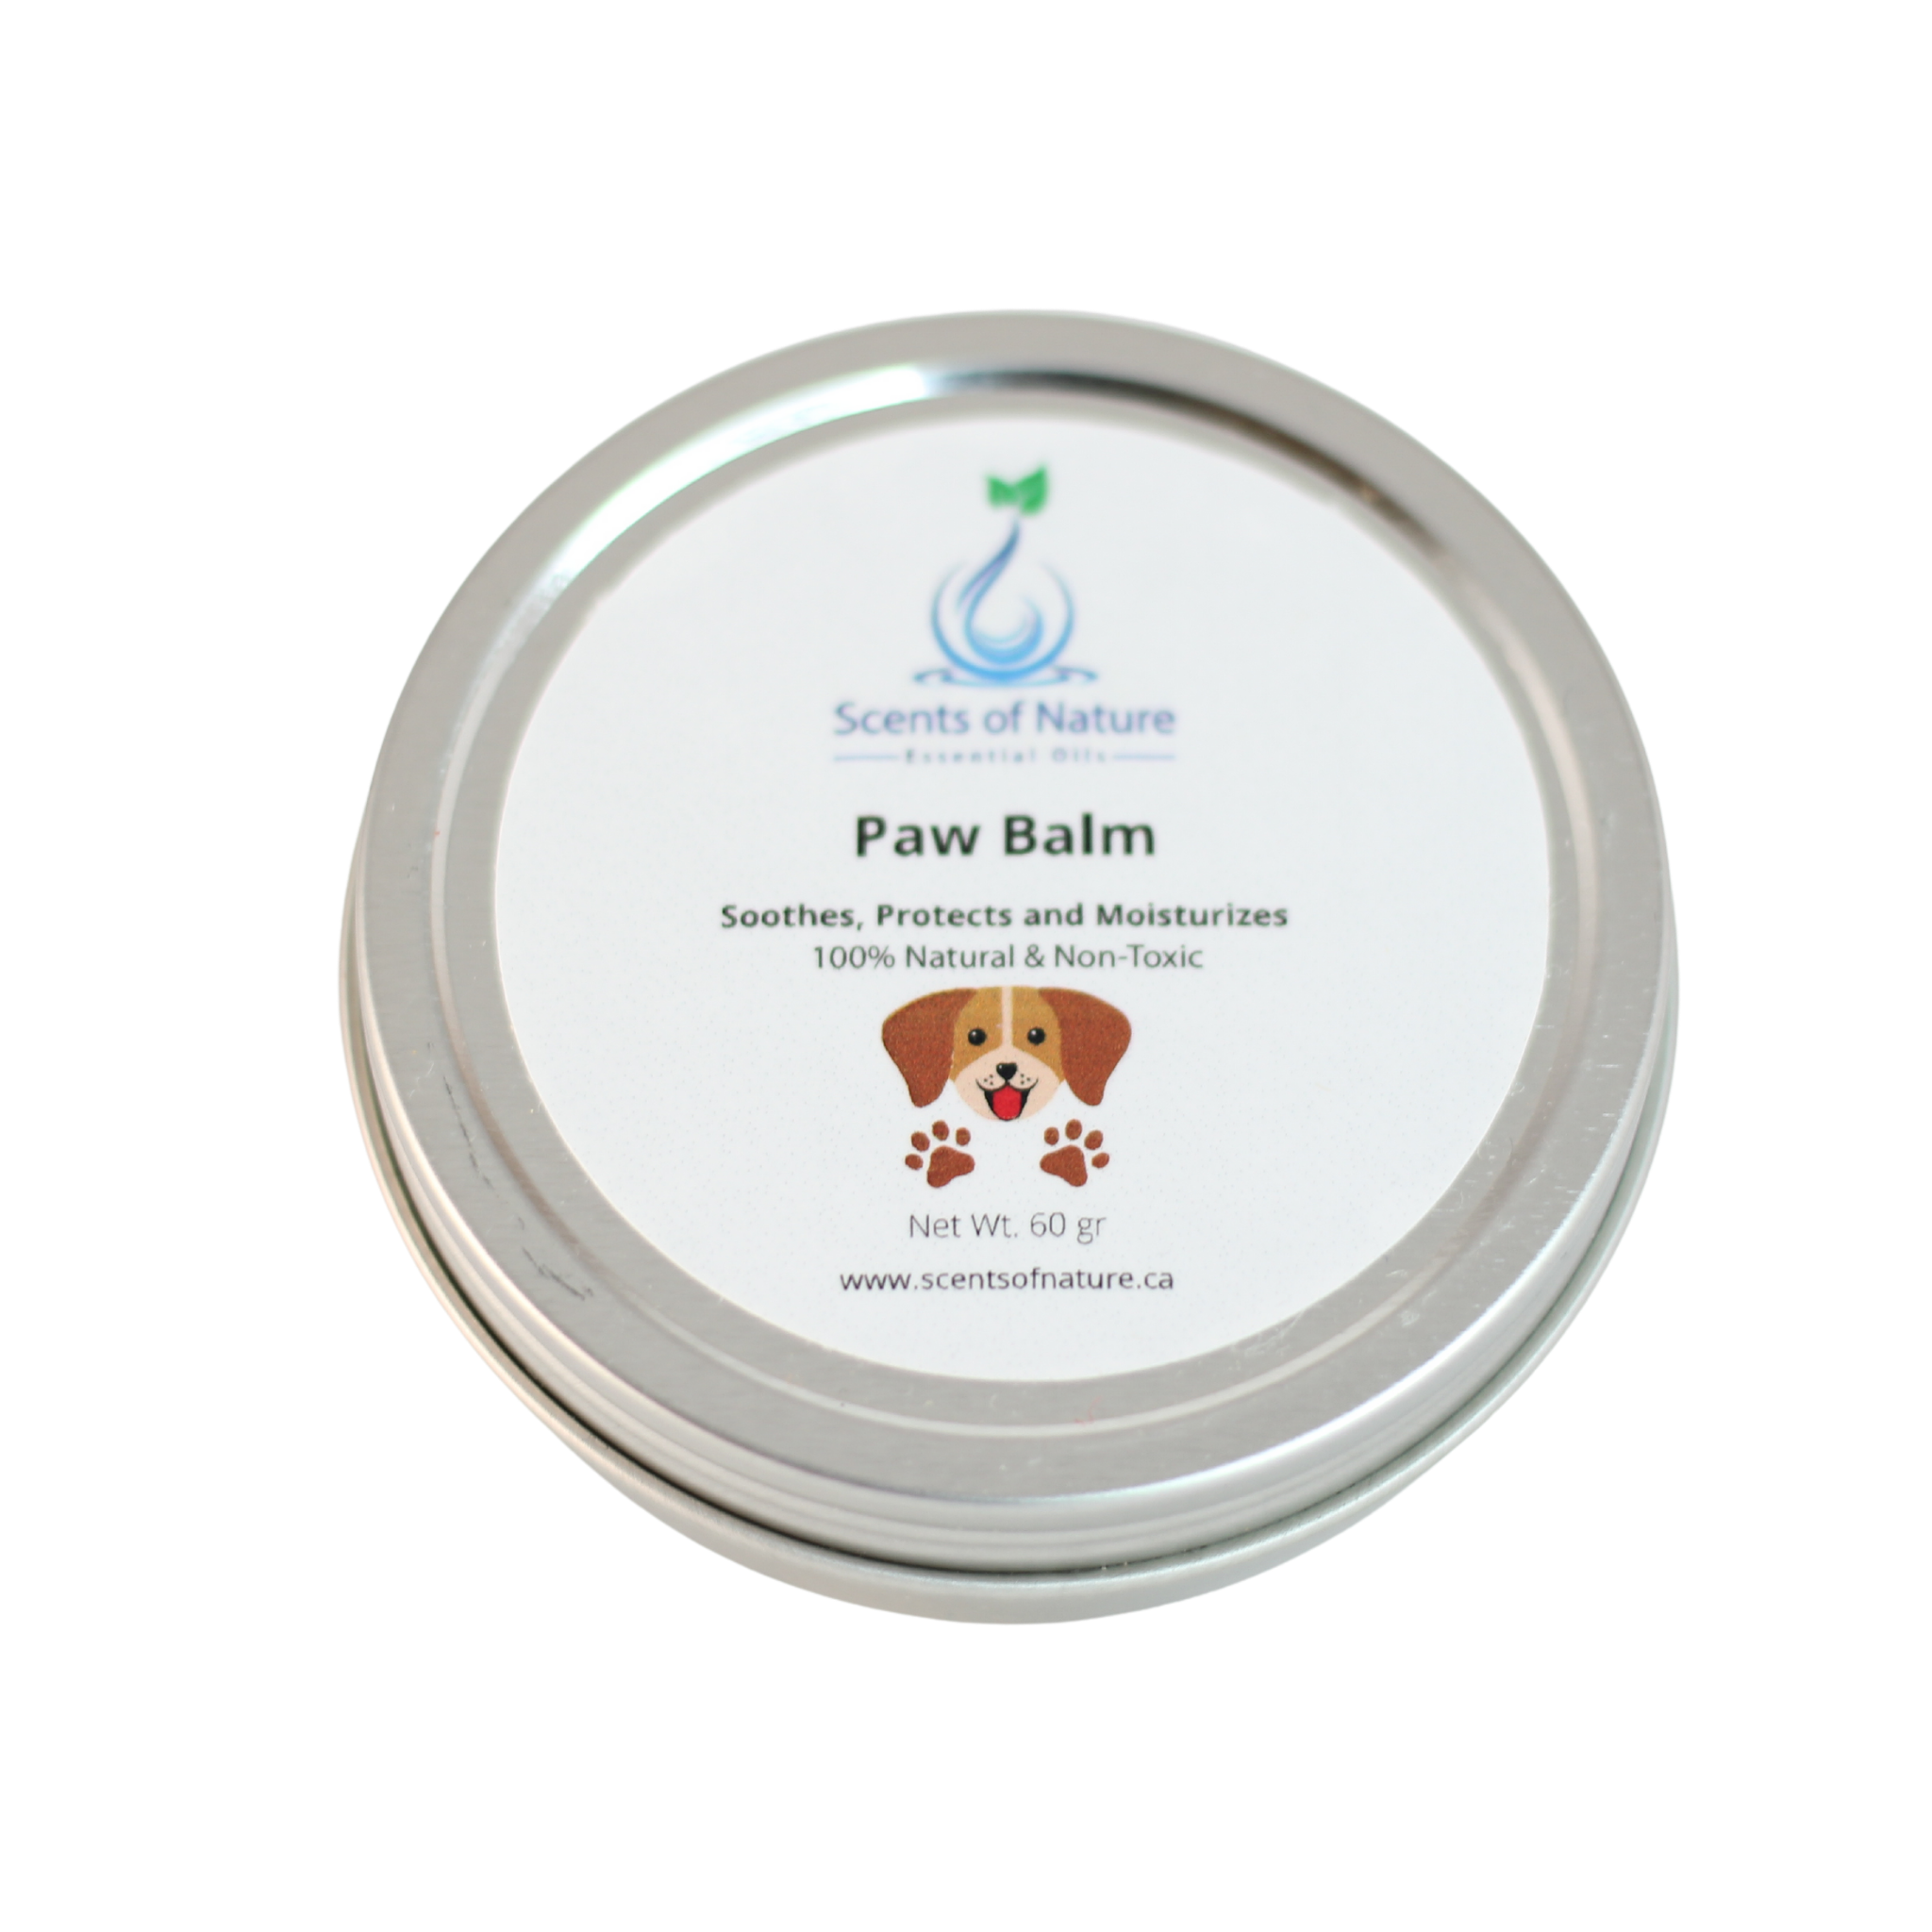 Paw balm – Scents of Nature